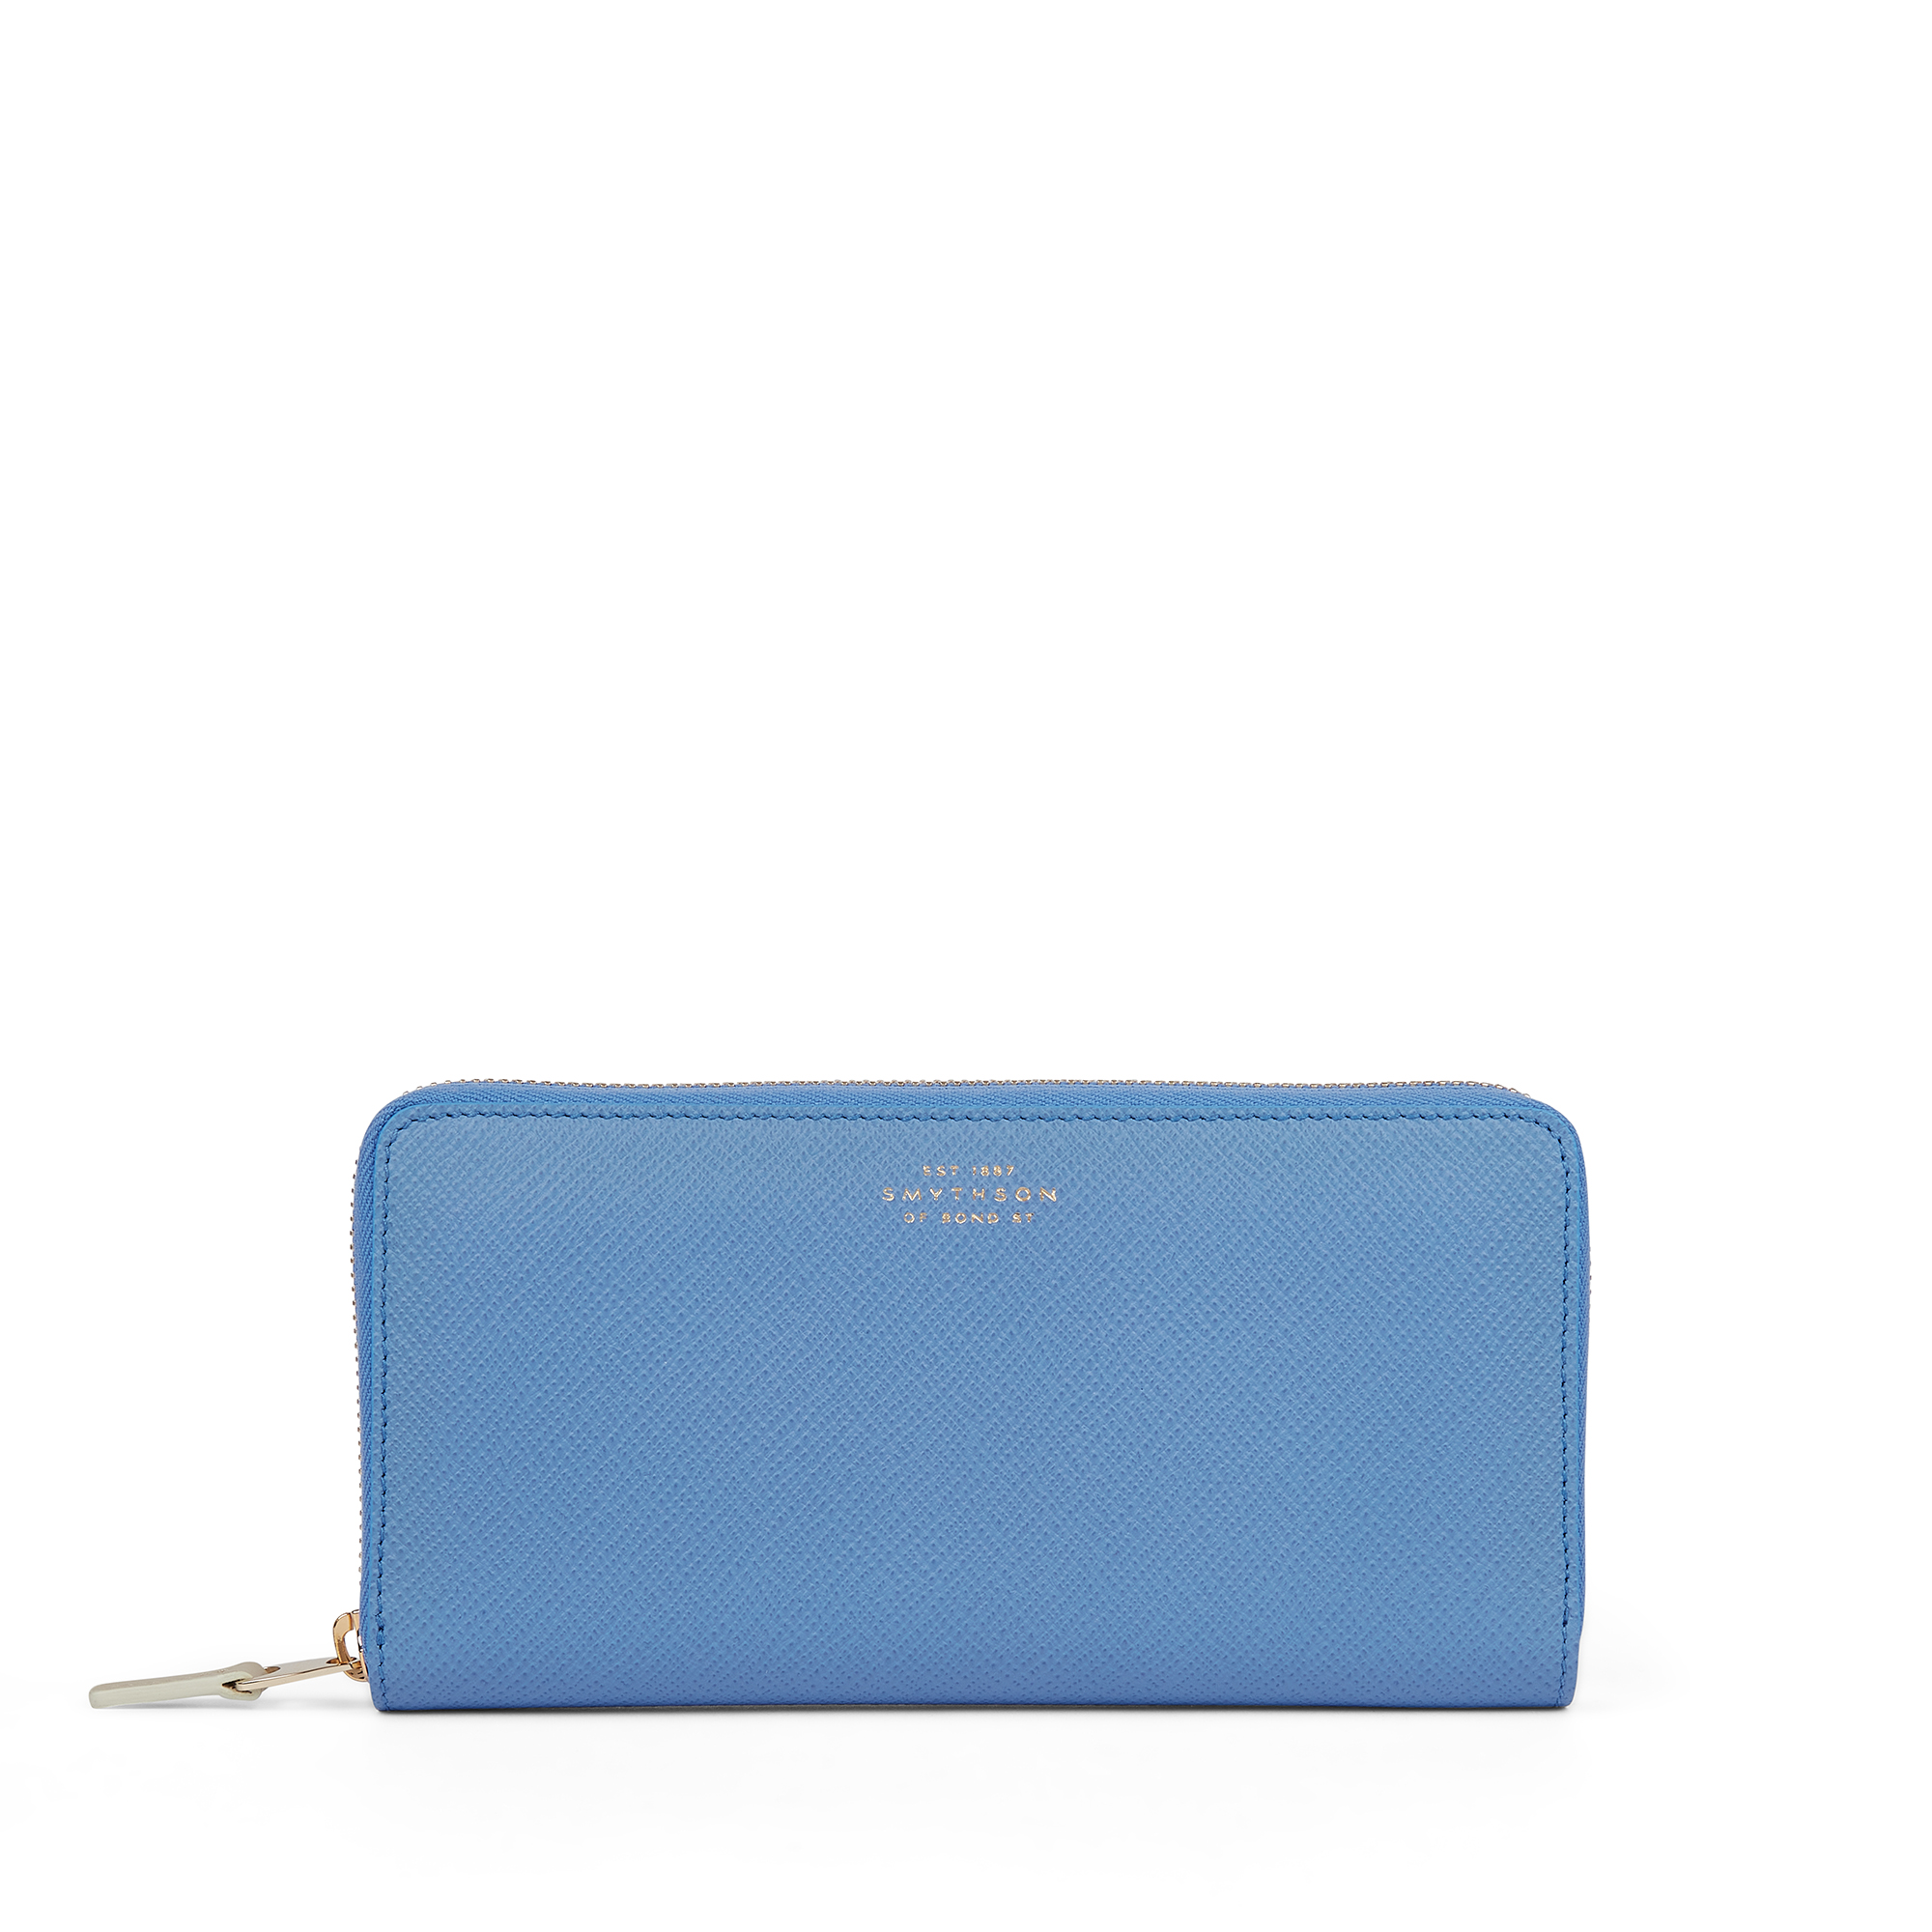 Smythson Large Zip Around Purse In Panama In Blue